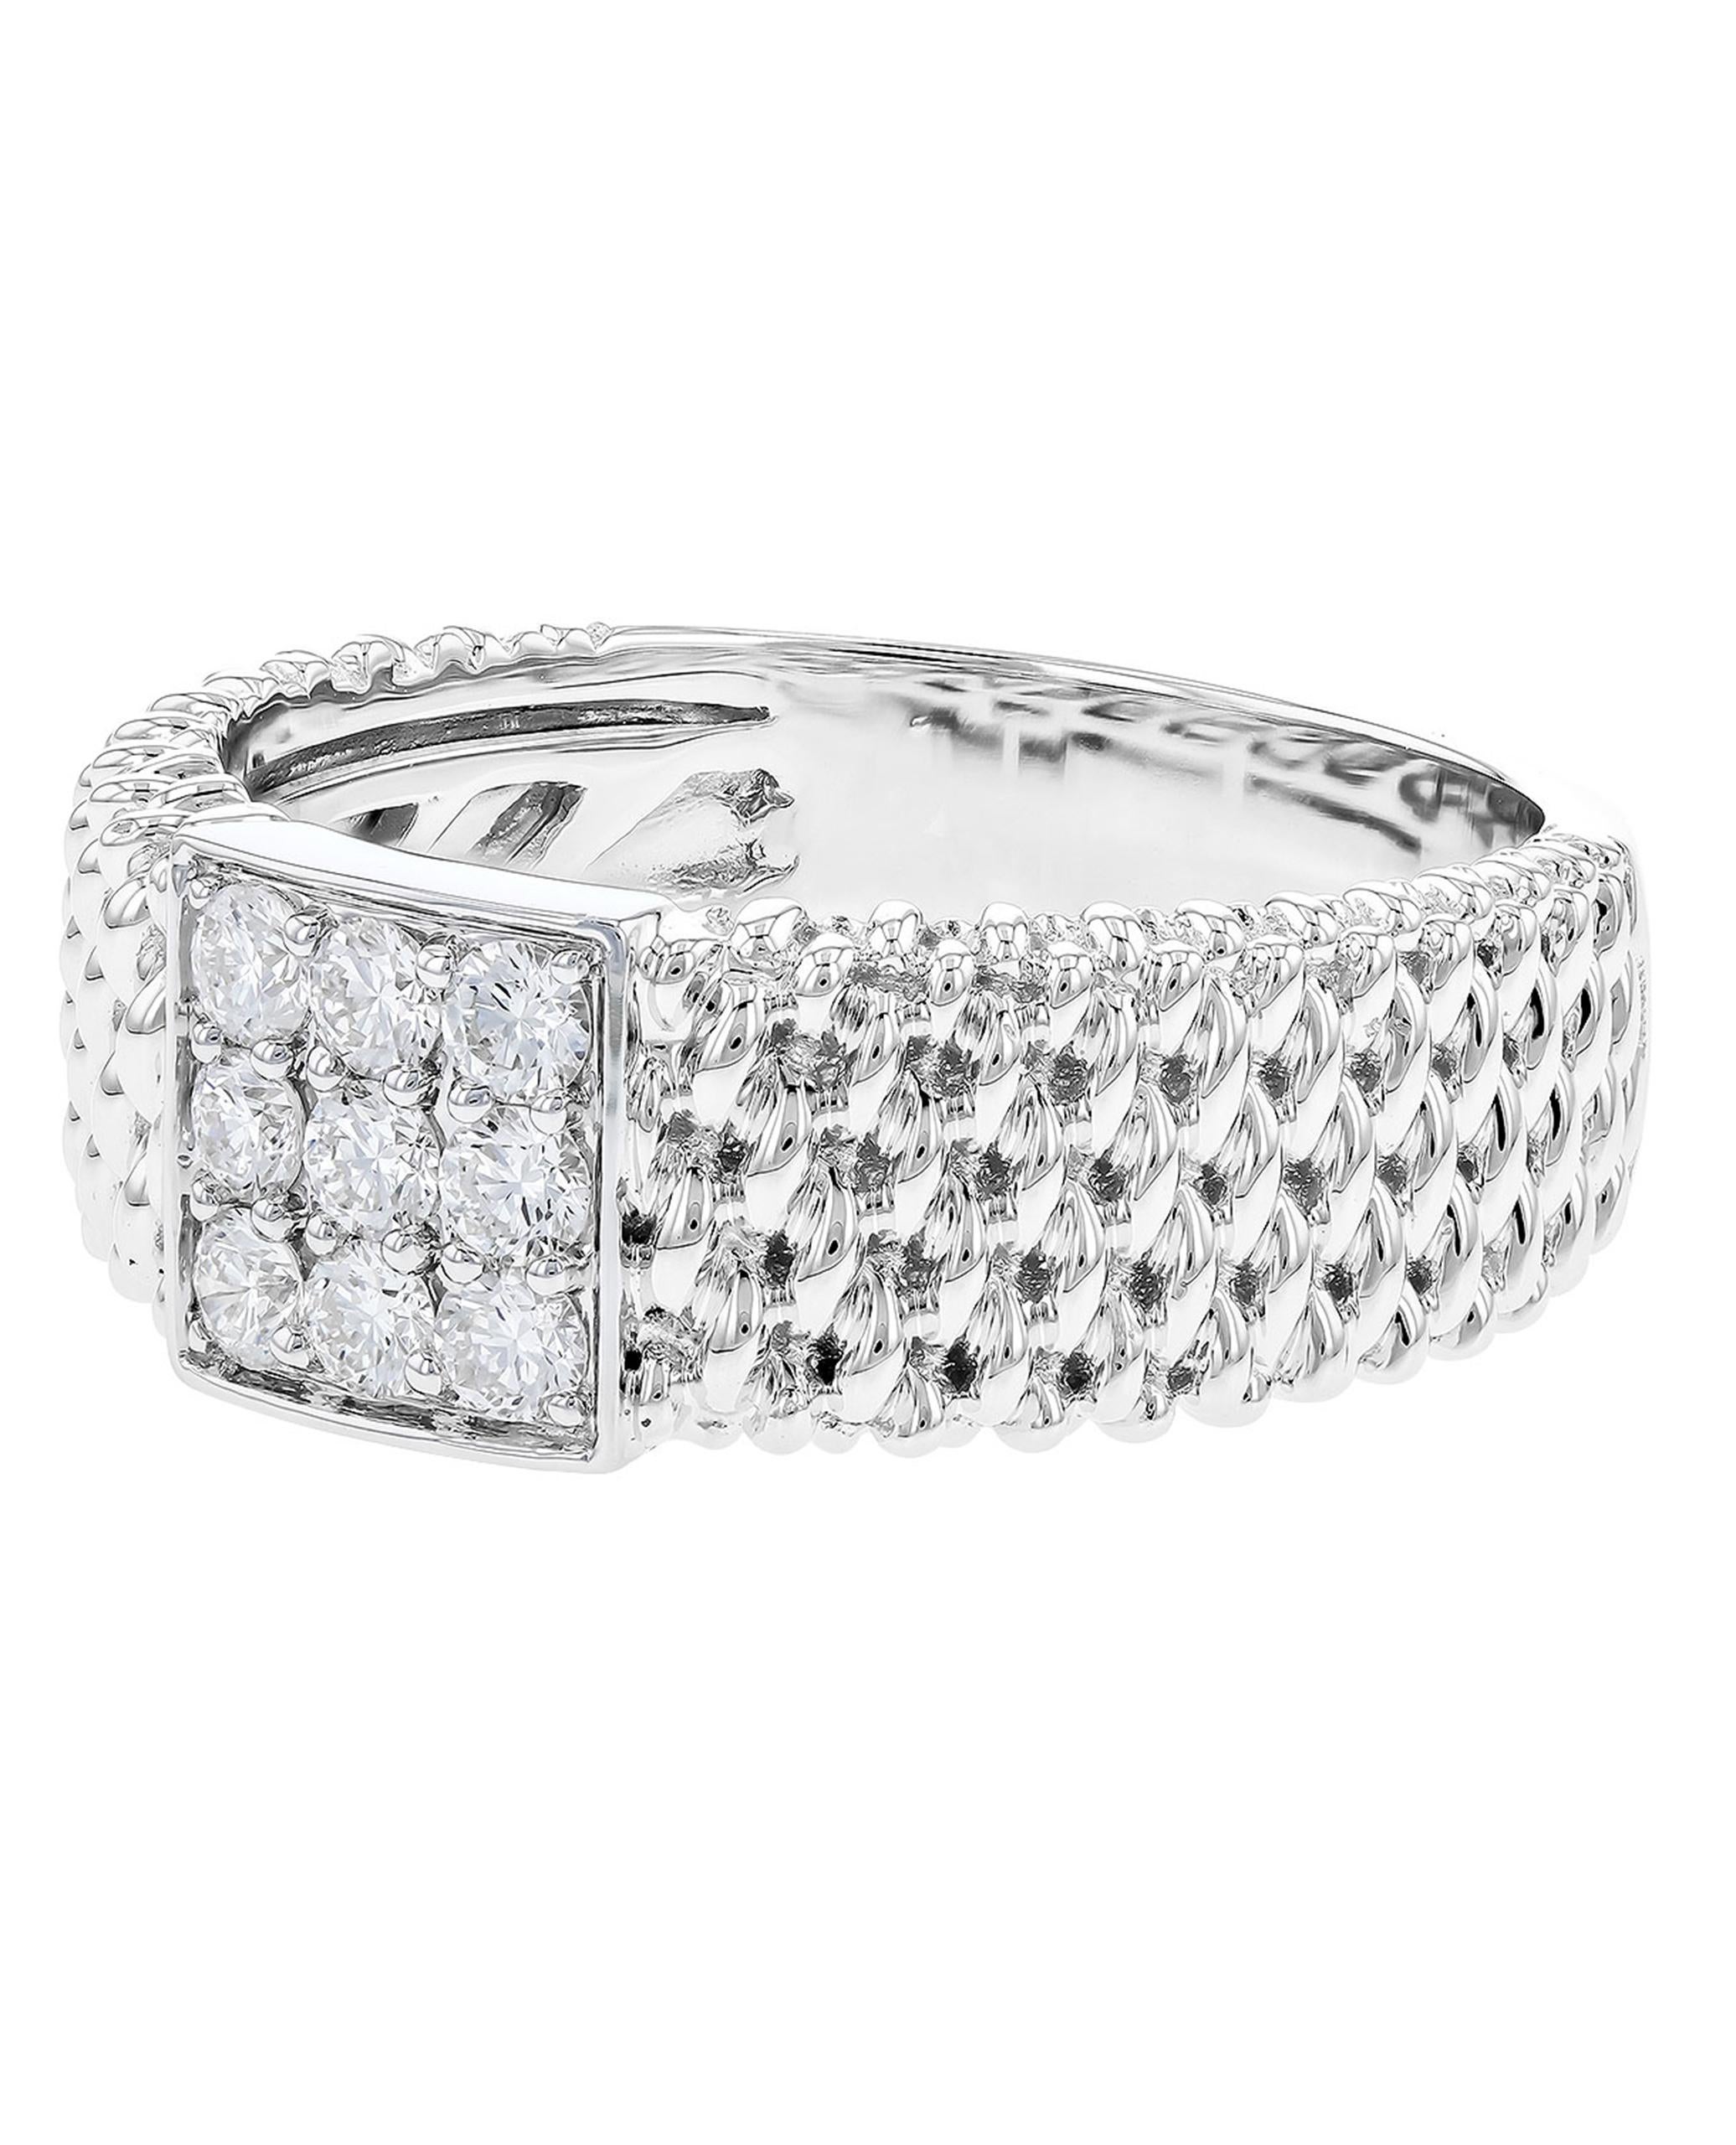 Allison Kaufman 14K white gold mesh ring with 9 round brilliant-cut diamonds 0.33 carat total weight.

- The diamonds are G/H color, SI1 clarity.
- Finger size 7.